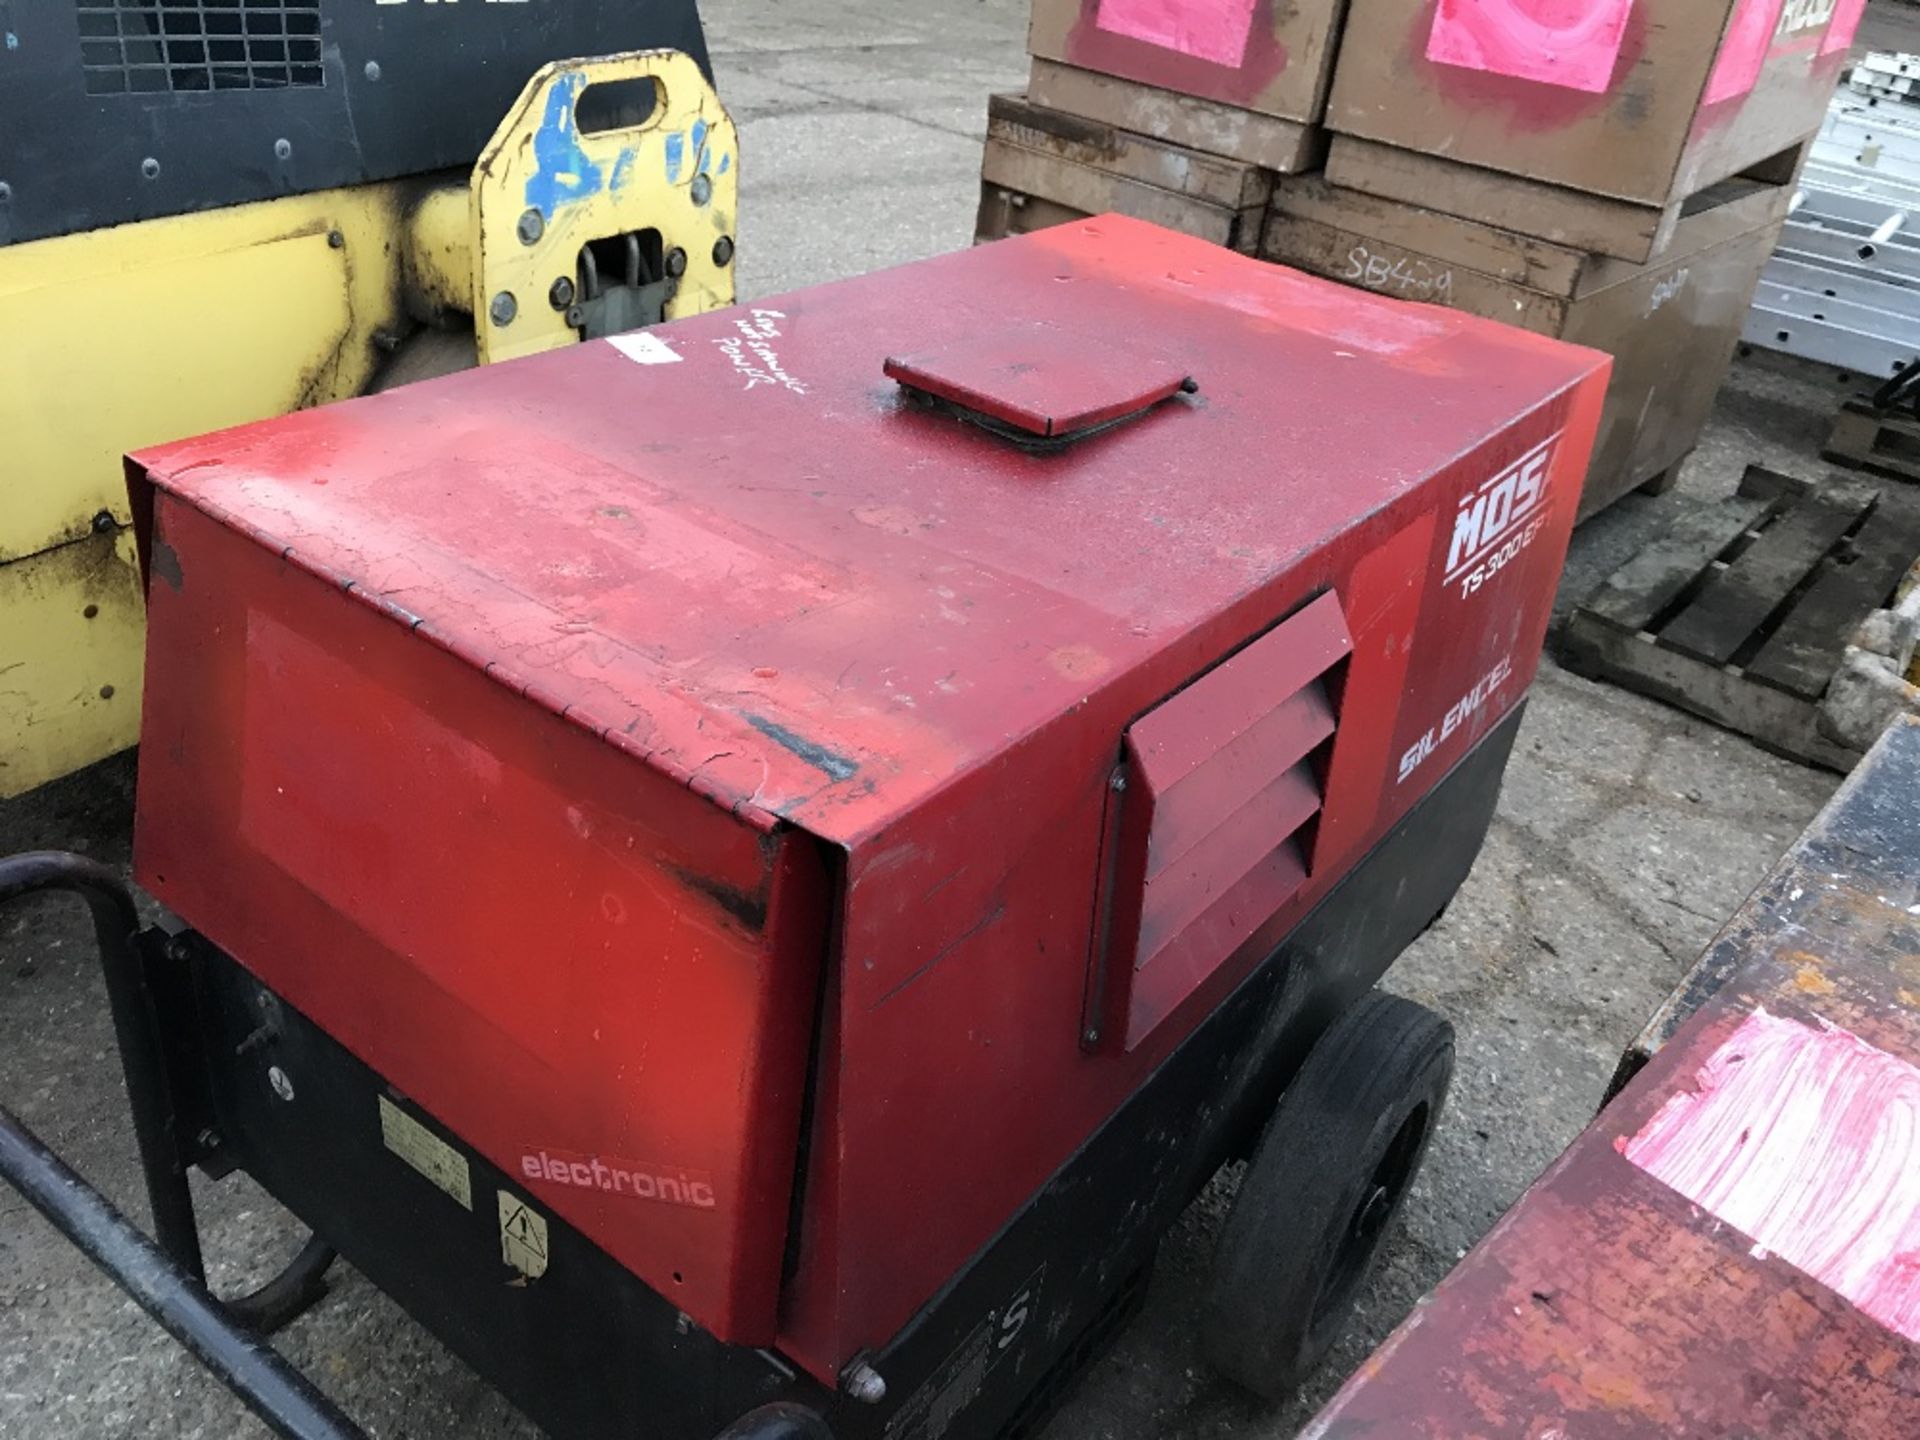 MOSA TS300EP1 BARROW WELDER...WHEN TESTED WAS SEEN TO RUN BUT NOT SHOW POWER